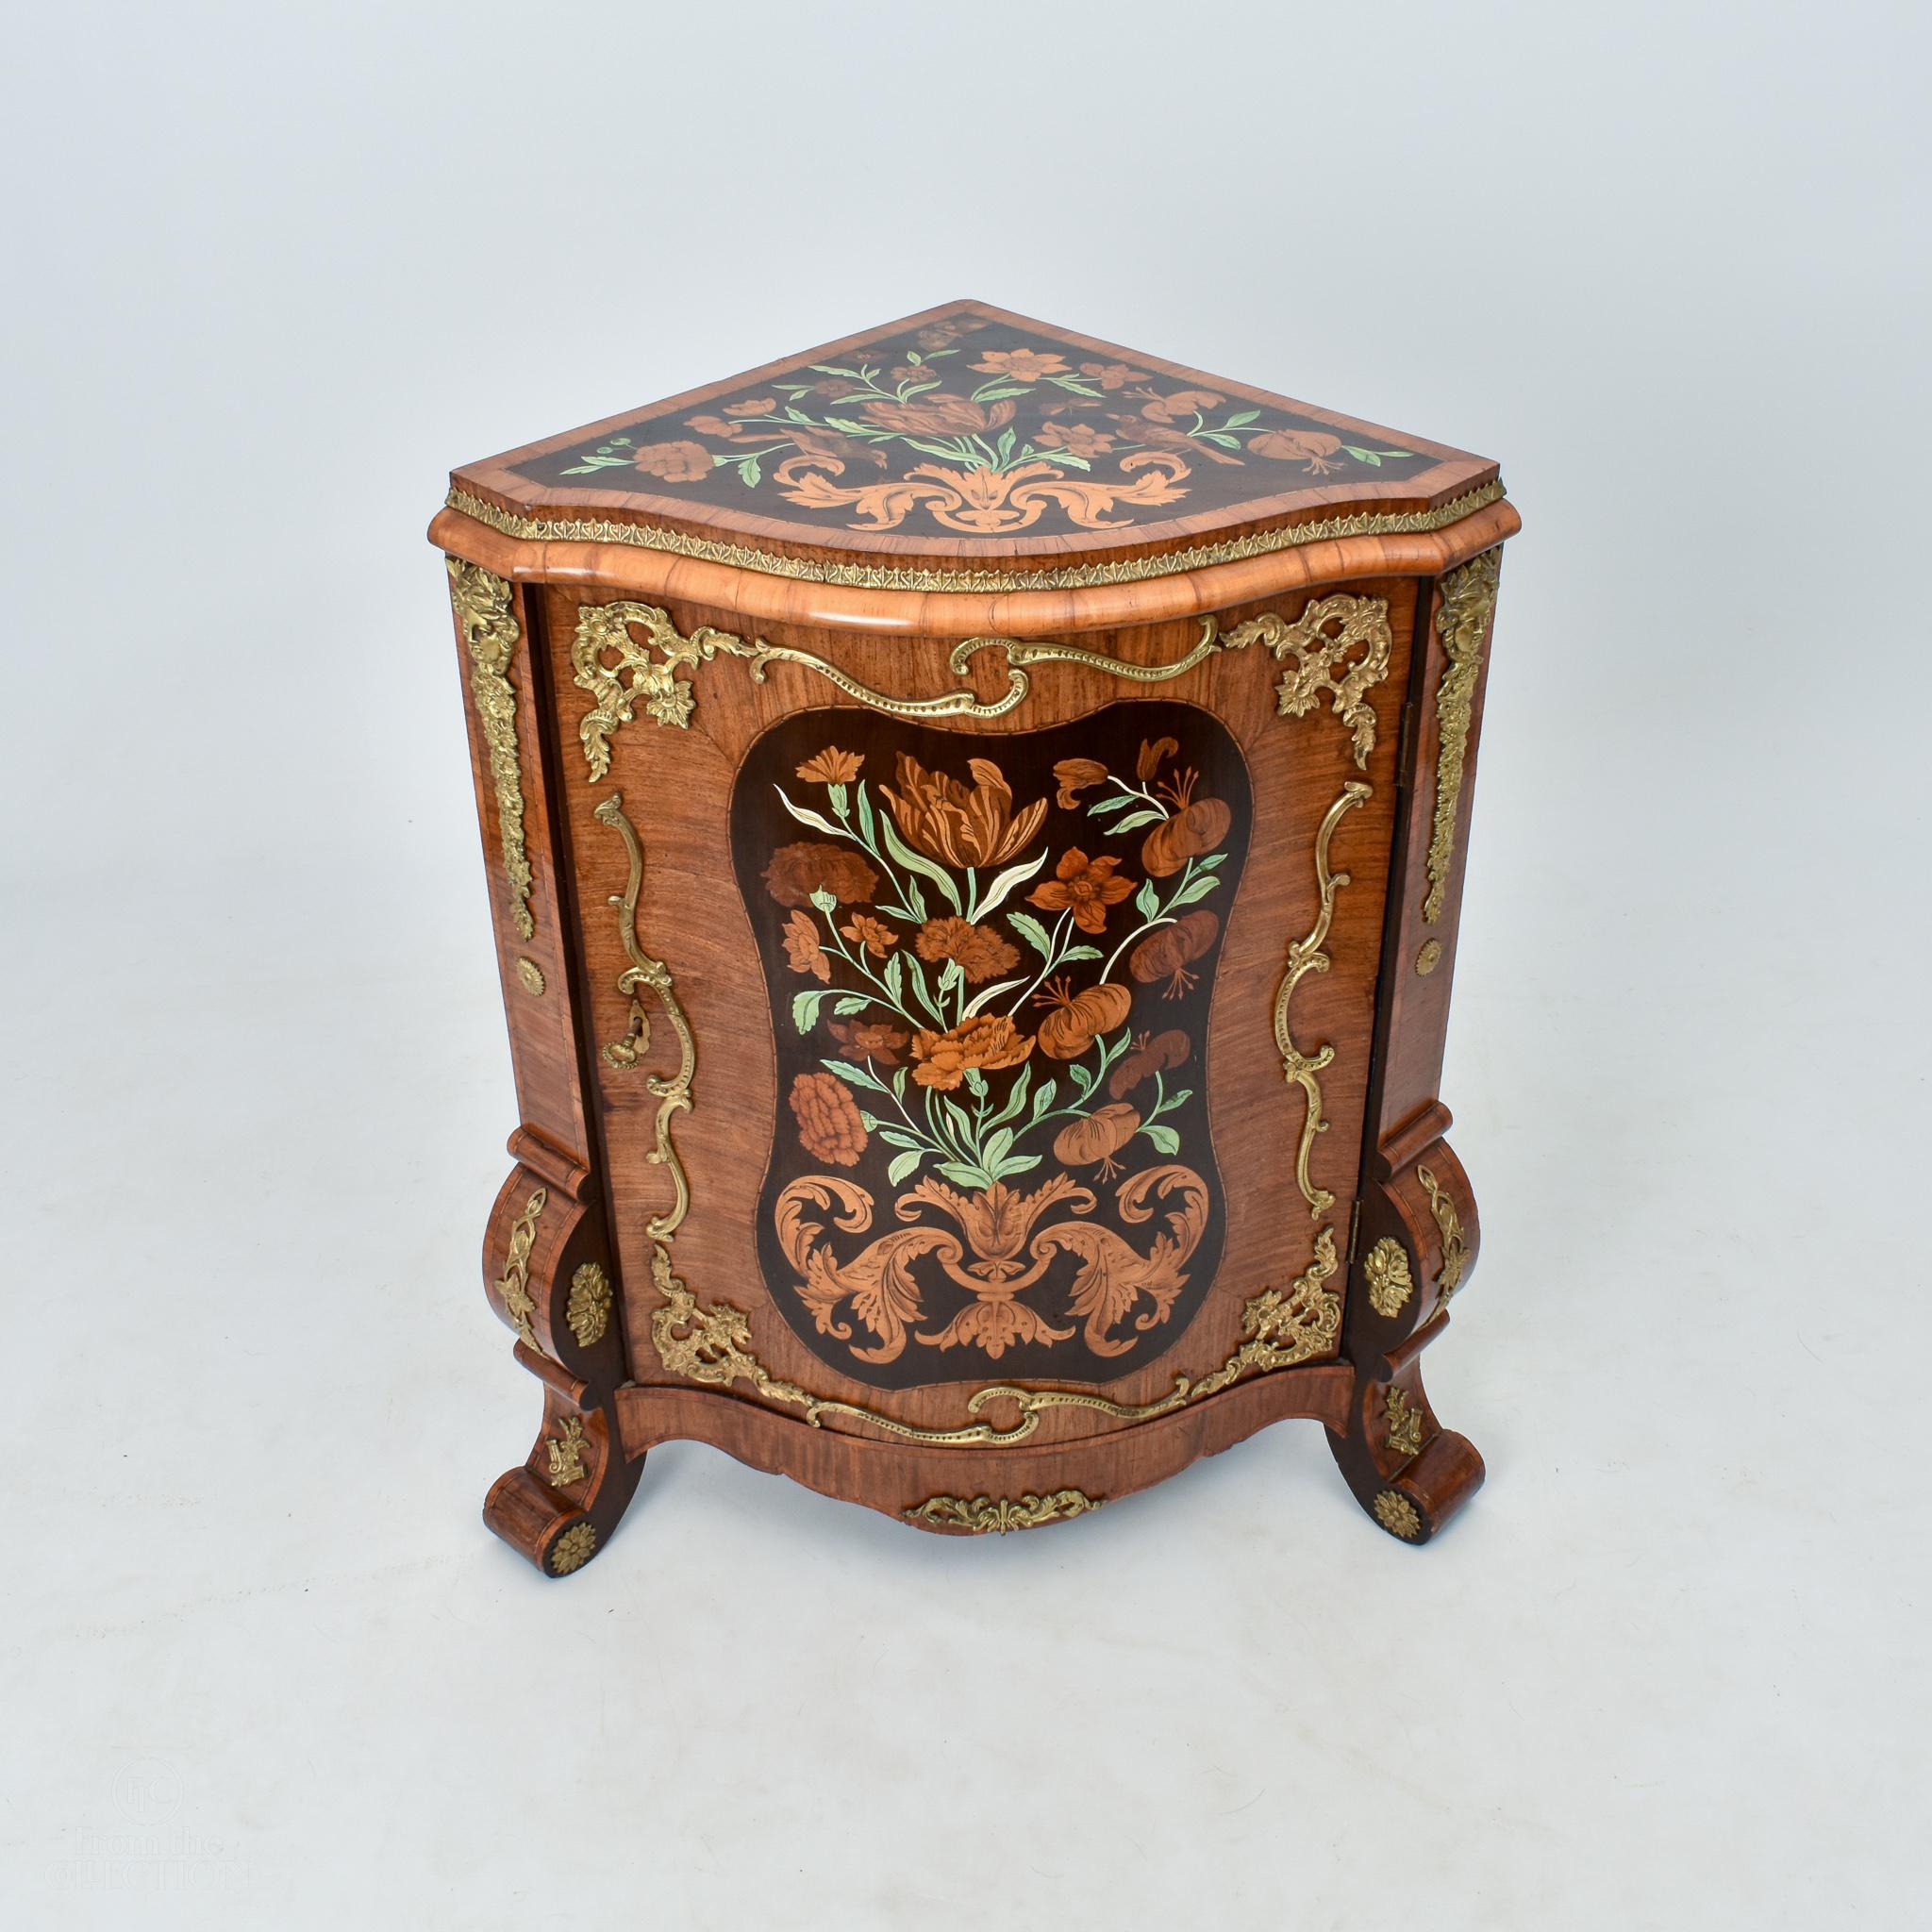 An exceptional testament to the artistry of the late 19th century, these exceedingly rare marquetry corner cabinets, dating back to circa 1880, stand as captivating showcases of intricate craftsmanship. The harmonious marriage of marquetry and